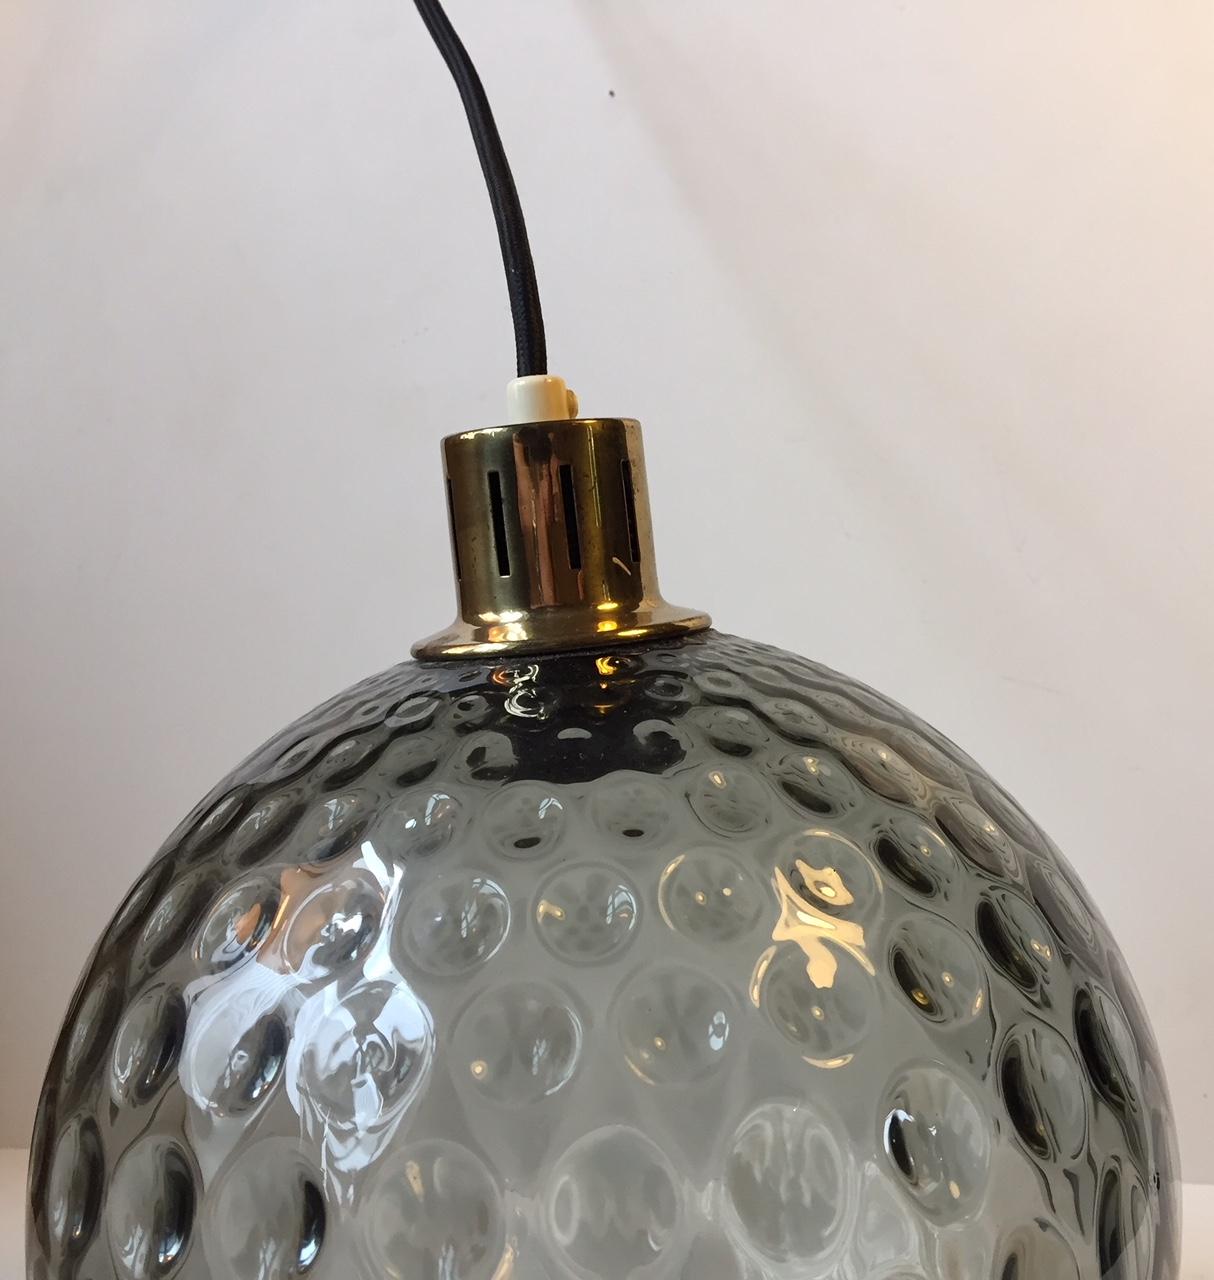 This pendant was manufactured by Orrefors in Sweden during the 1960s. It features an optical smoked glass dome and a partially perforated brass top. The design of this pendant is reminiscent of Wilhelm Wagenfeld and Venini/Murano.